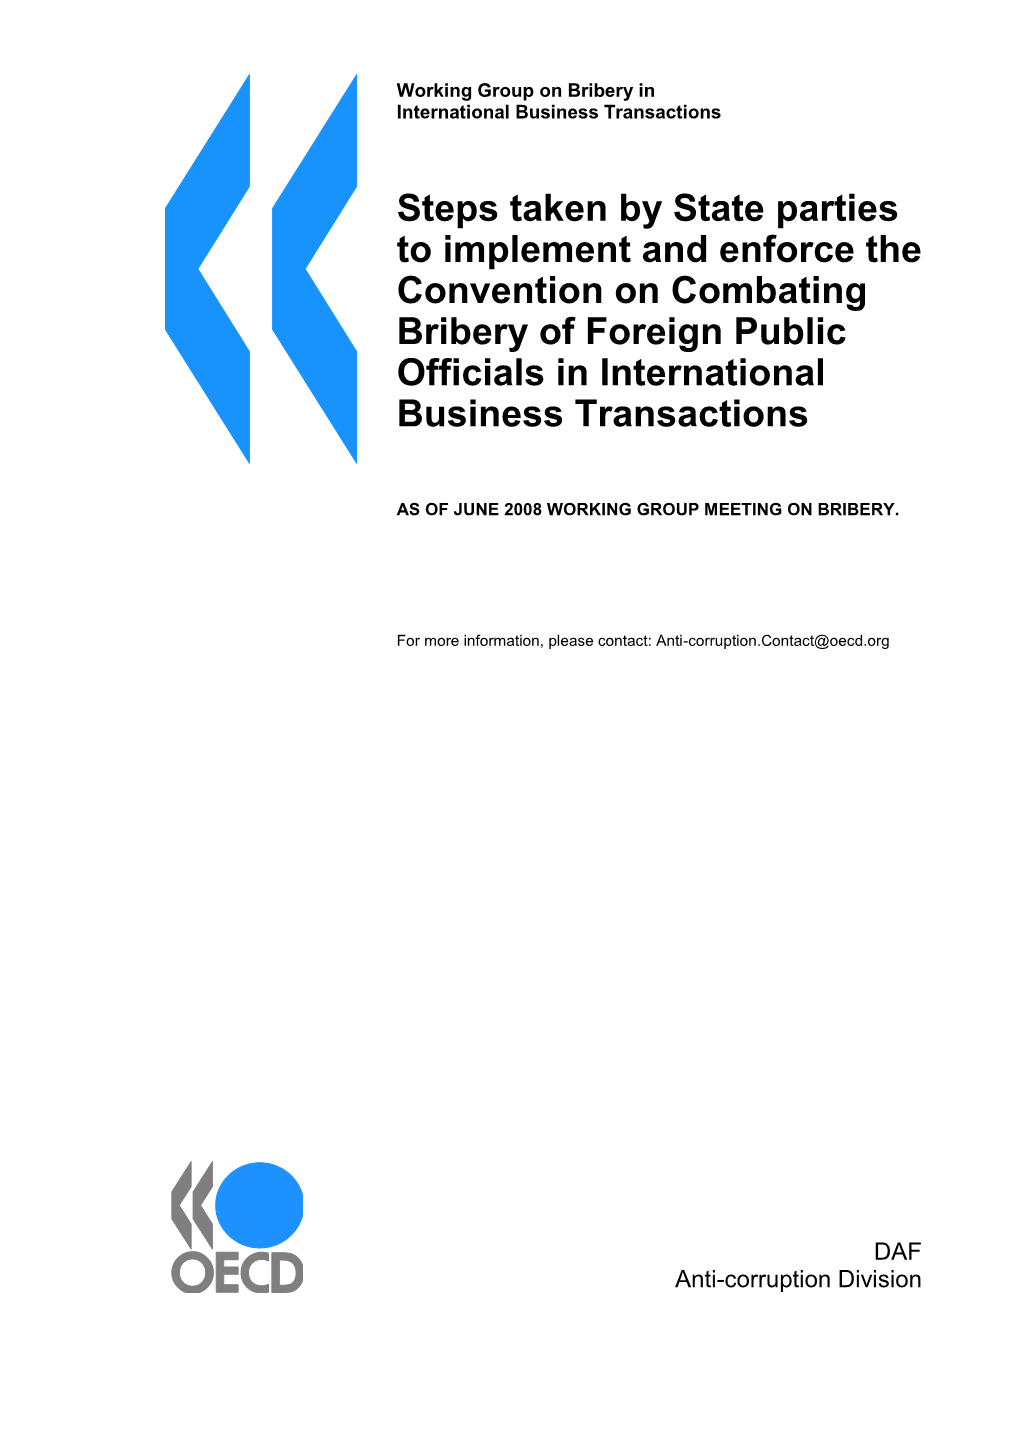 Steps Taken by State Parties to Implement and Enforce the Convention on Combating Bribery of Foreign Public Officials in International Business Transactions